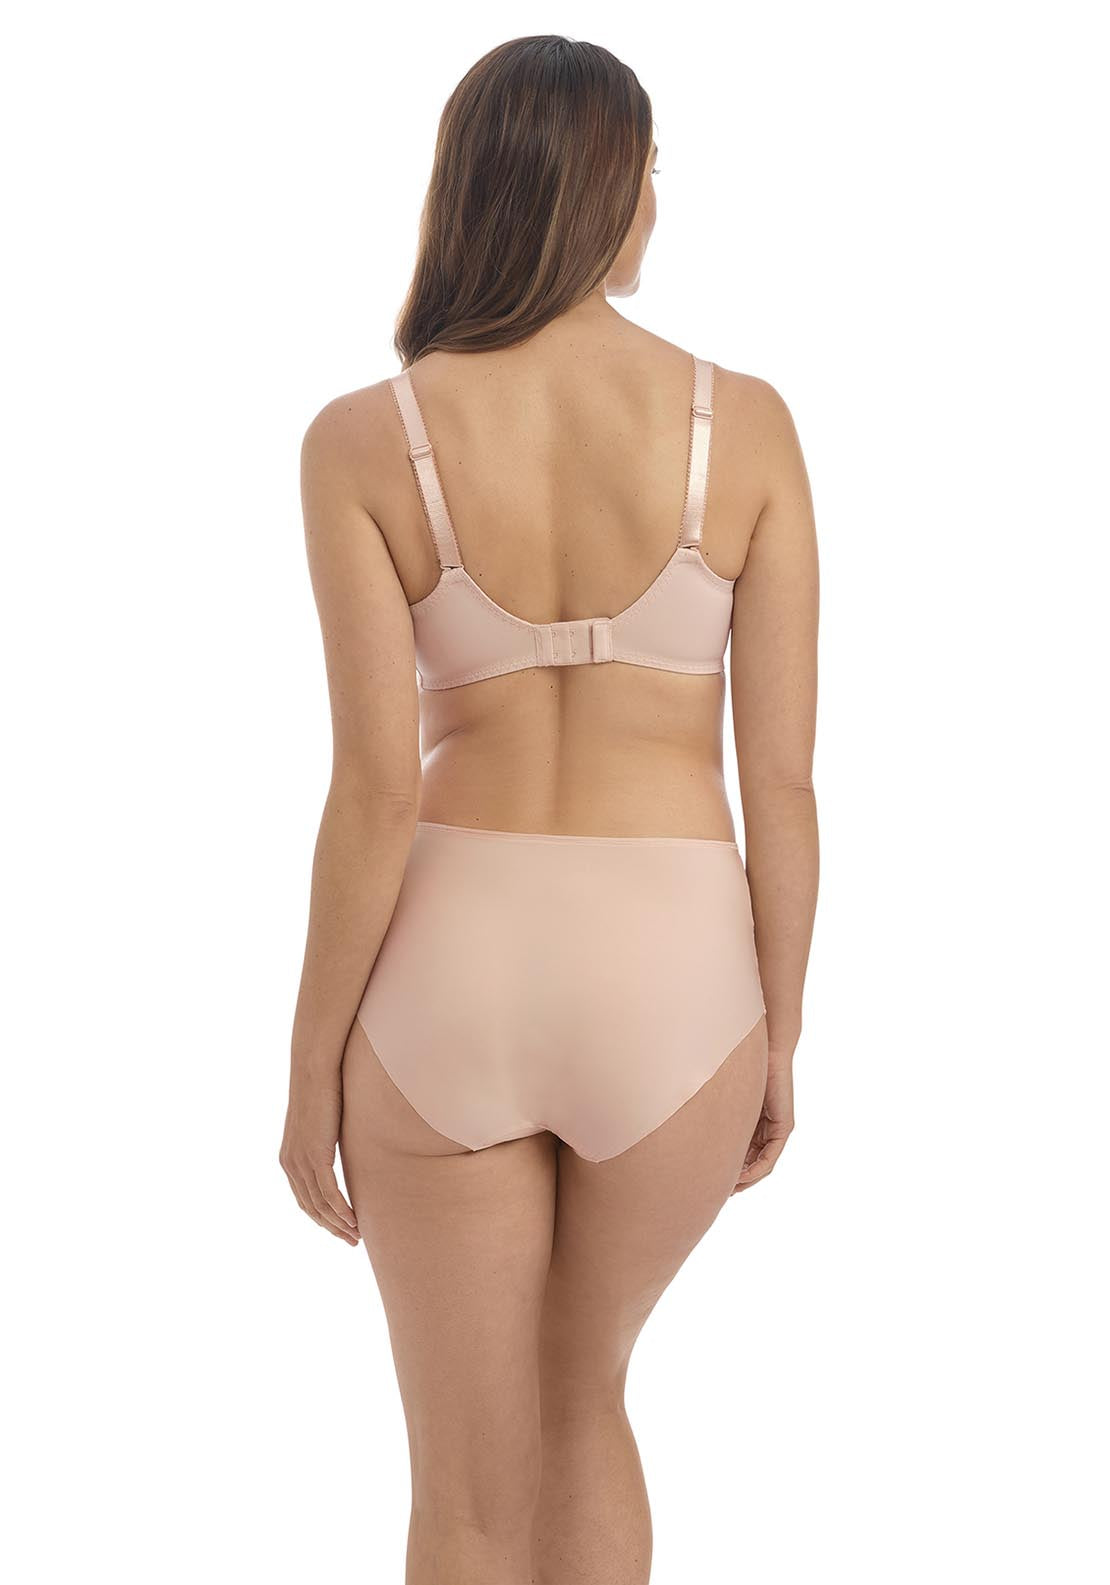 Fantasie Jocelyn Full Cup Side Support Bra 4 Shaws Department Stores